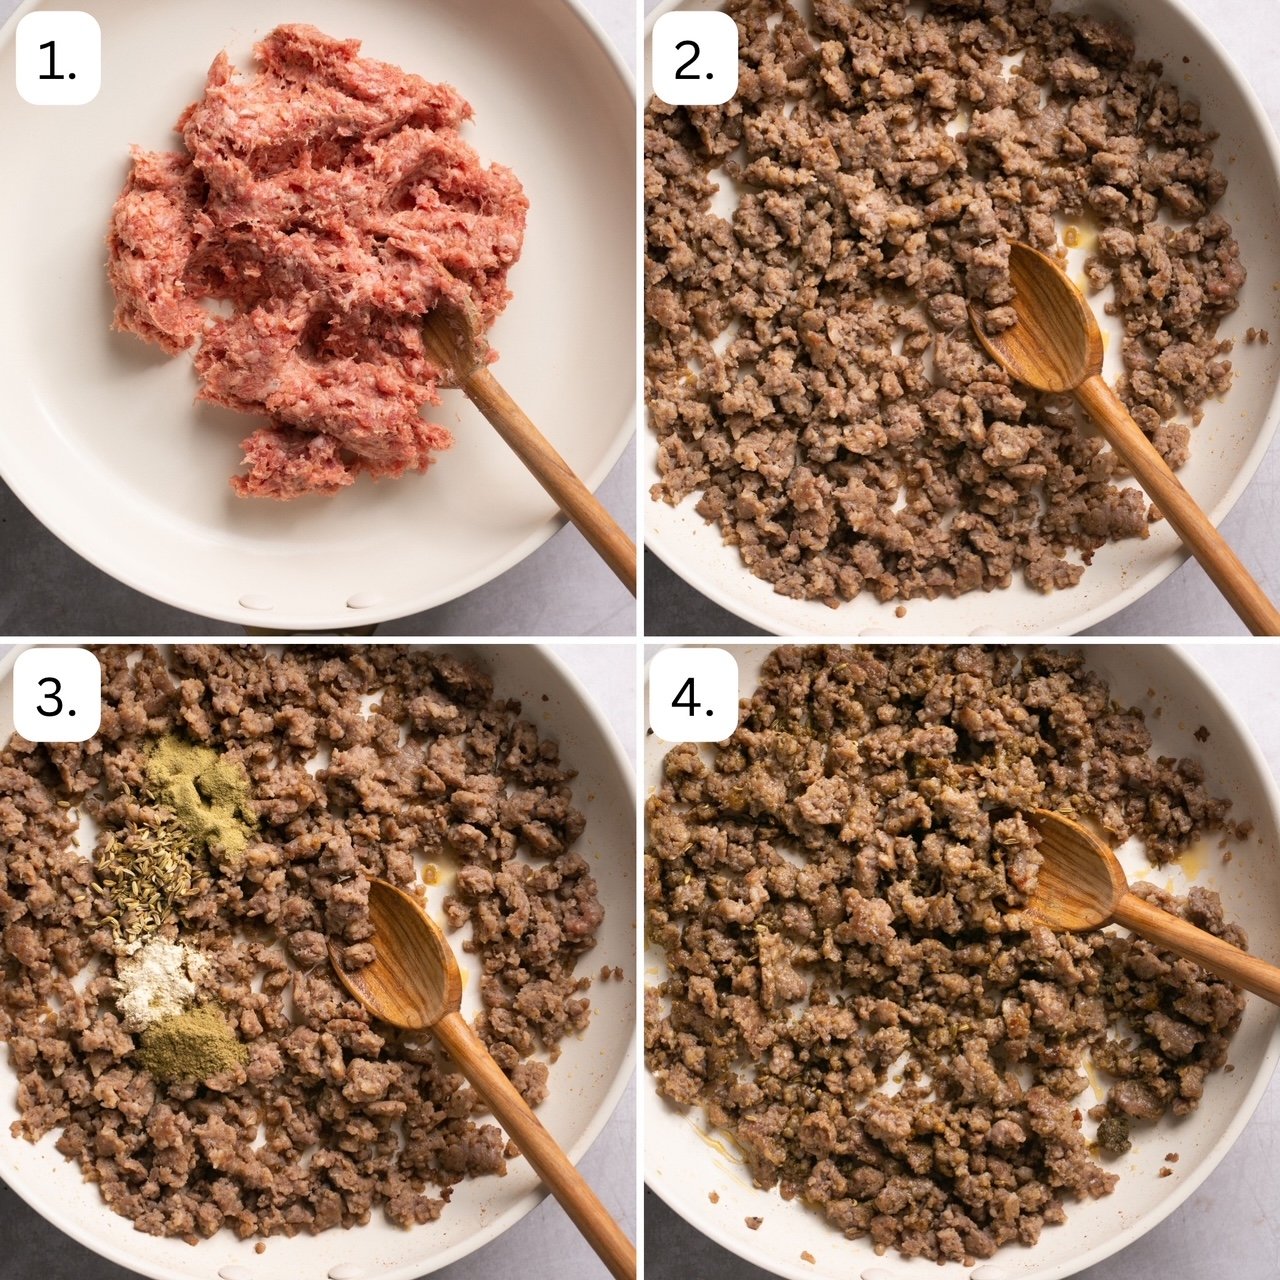 numbered step by step recipe photos showing how to prepare the sausage